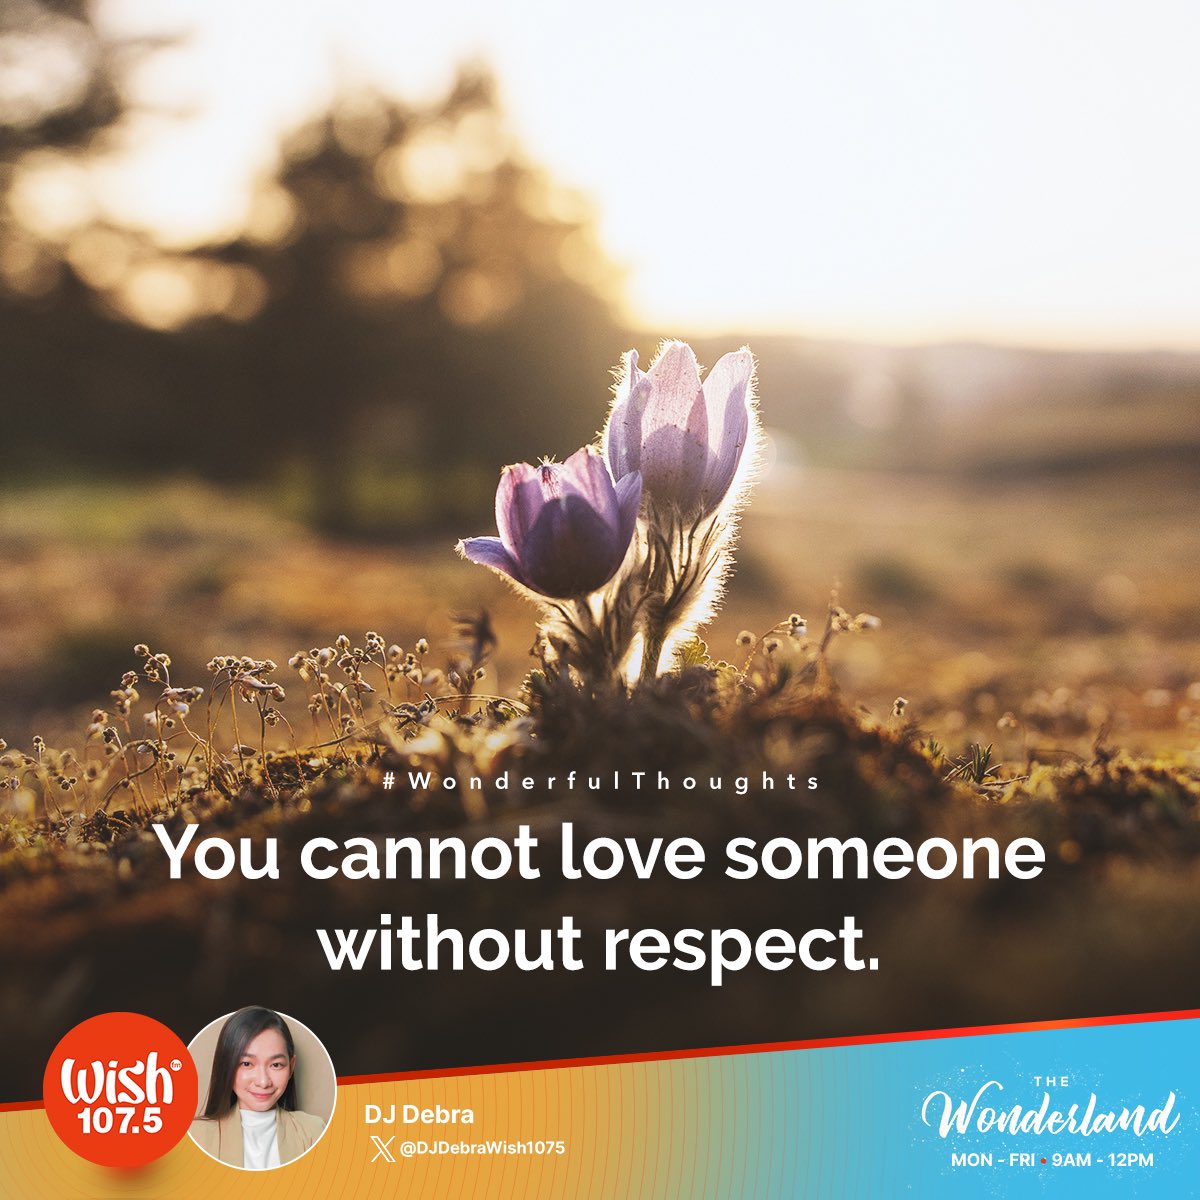 #WonderfulThoughts: You cannot love someone without respect.

Tune in to the Wonderland and enjoy the perfect mix of classic and contemporary hits from 9 a.m. until noon! Live streaming is also available via wish1075.com.